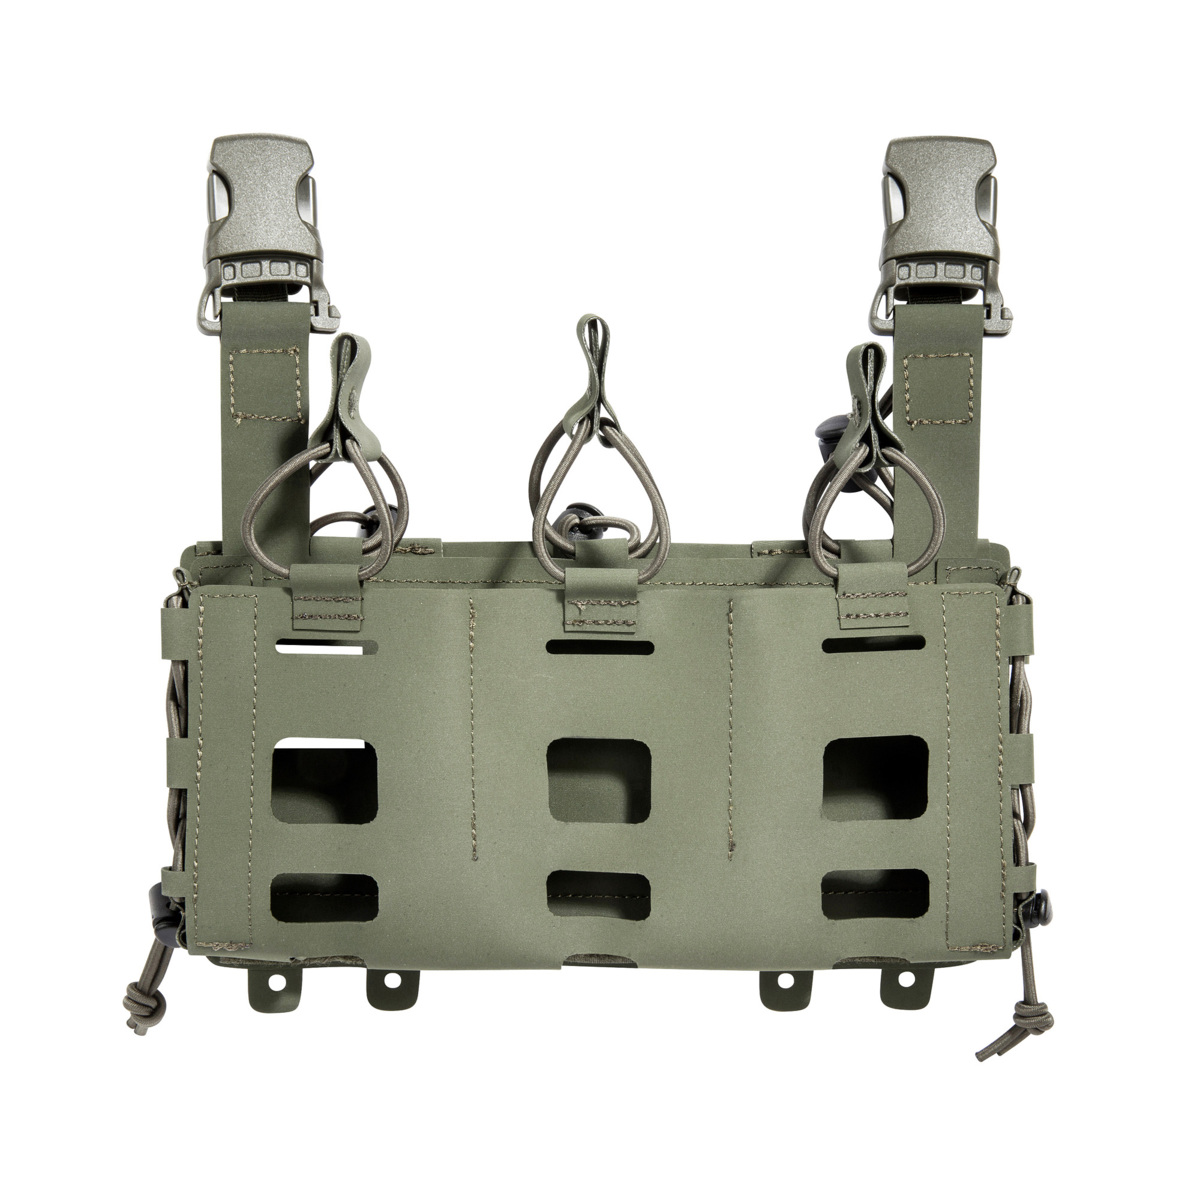 TT Carrier Mag Panel anfibia Olive